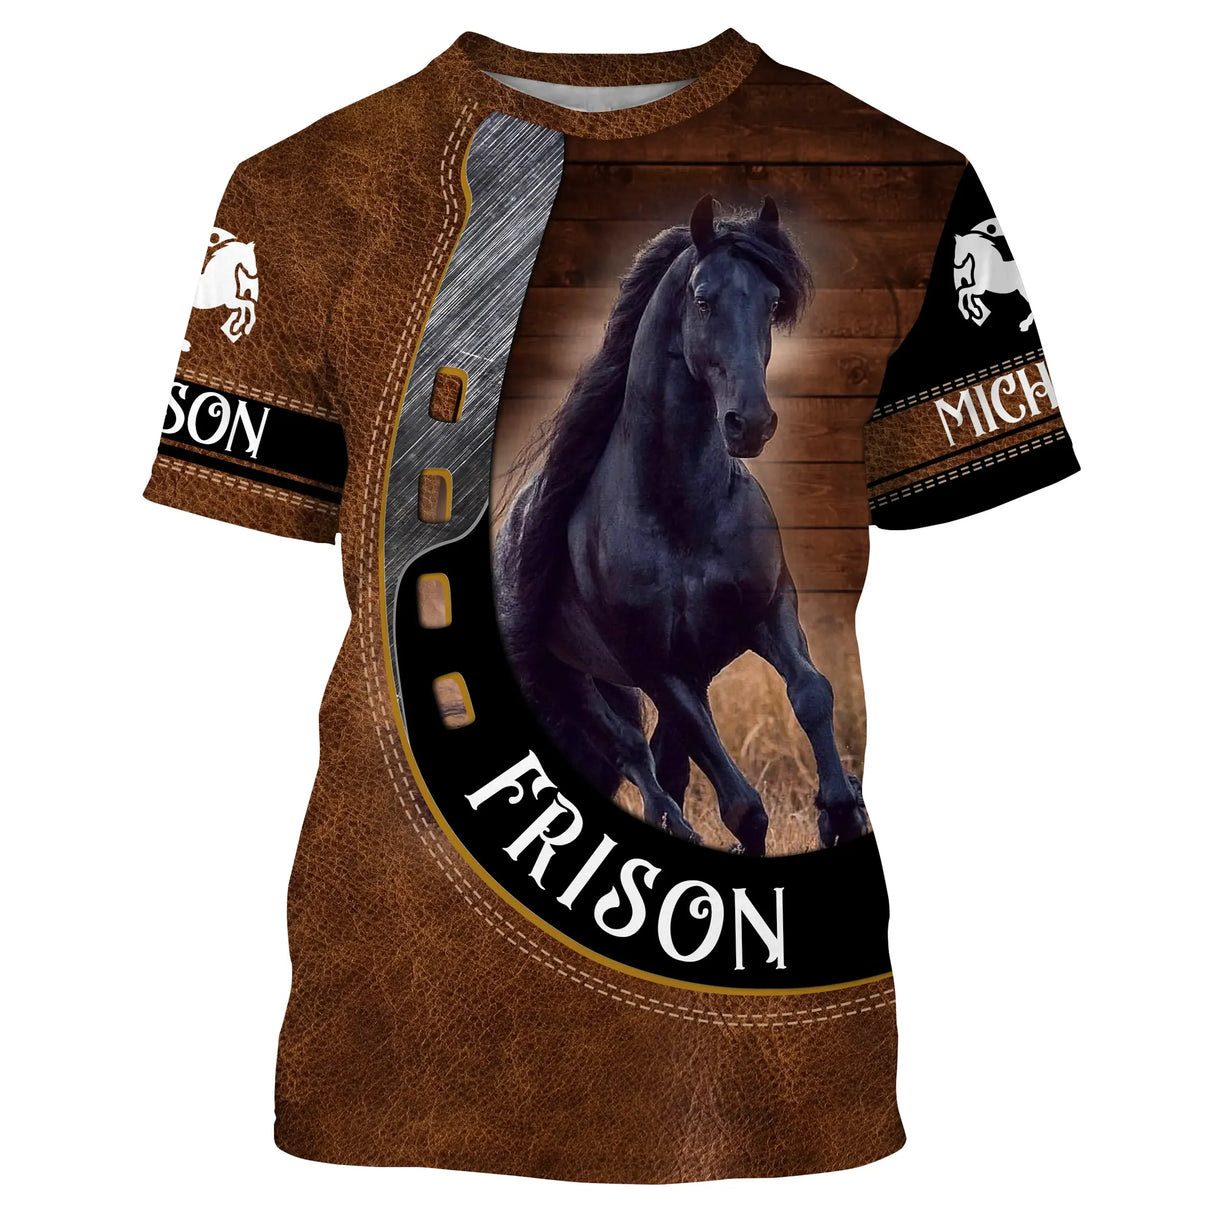 Friesian Horse, Saddle Horse Breed, Personalized Horse Riding Gift, Passion Horses, Love Friesian - CT05072206